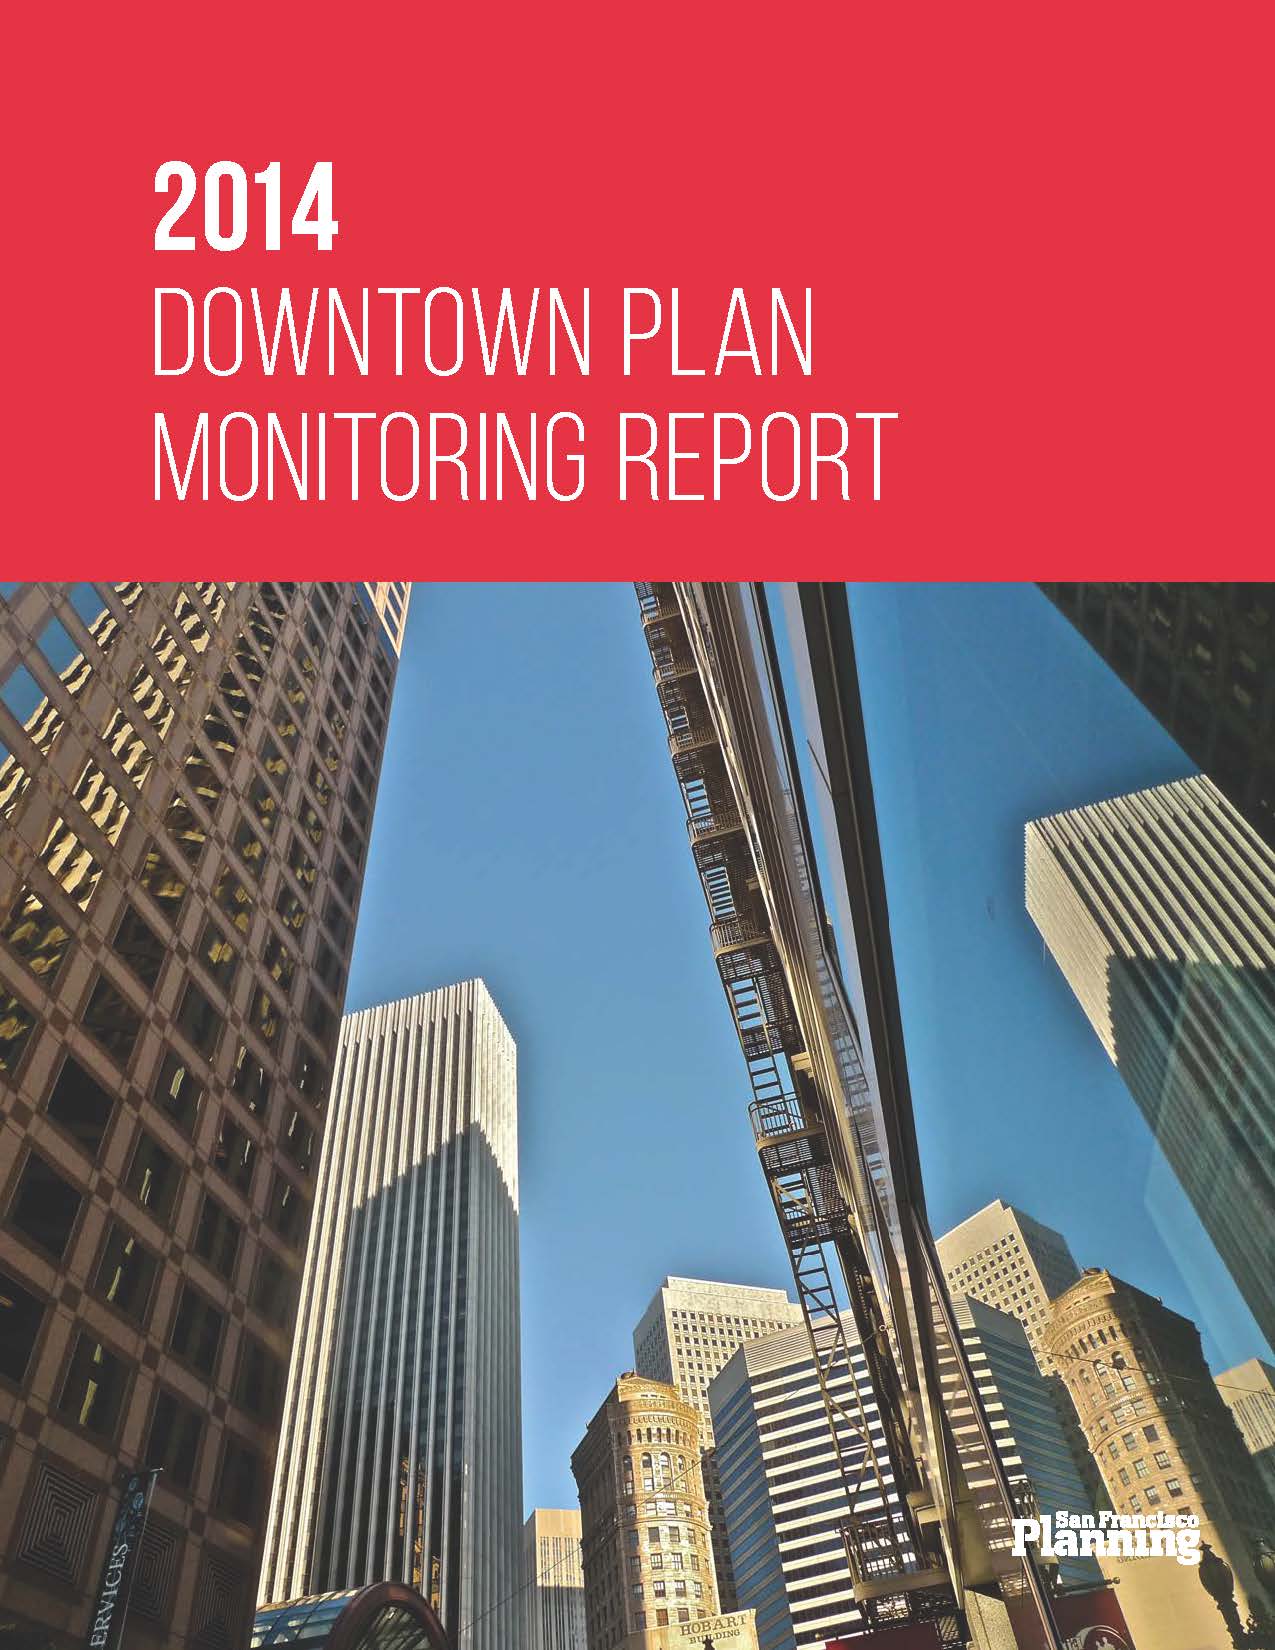 Cover Image for the Downtown Plan Monitoring Report 2014